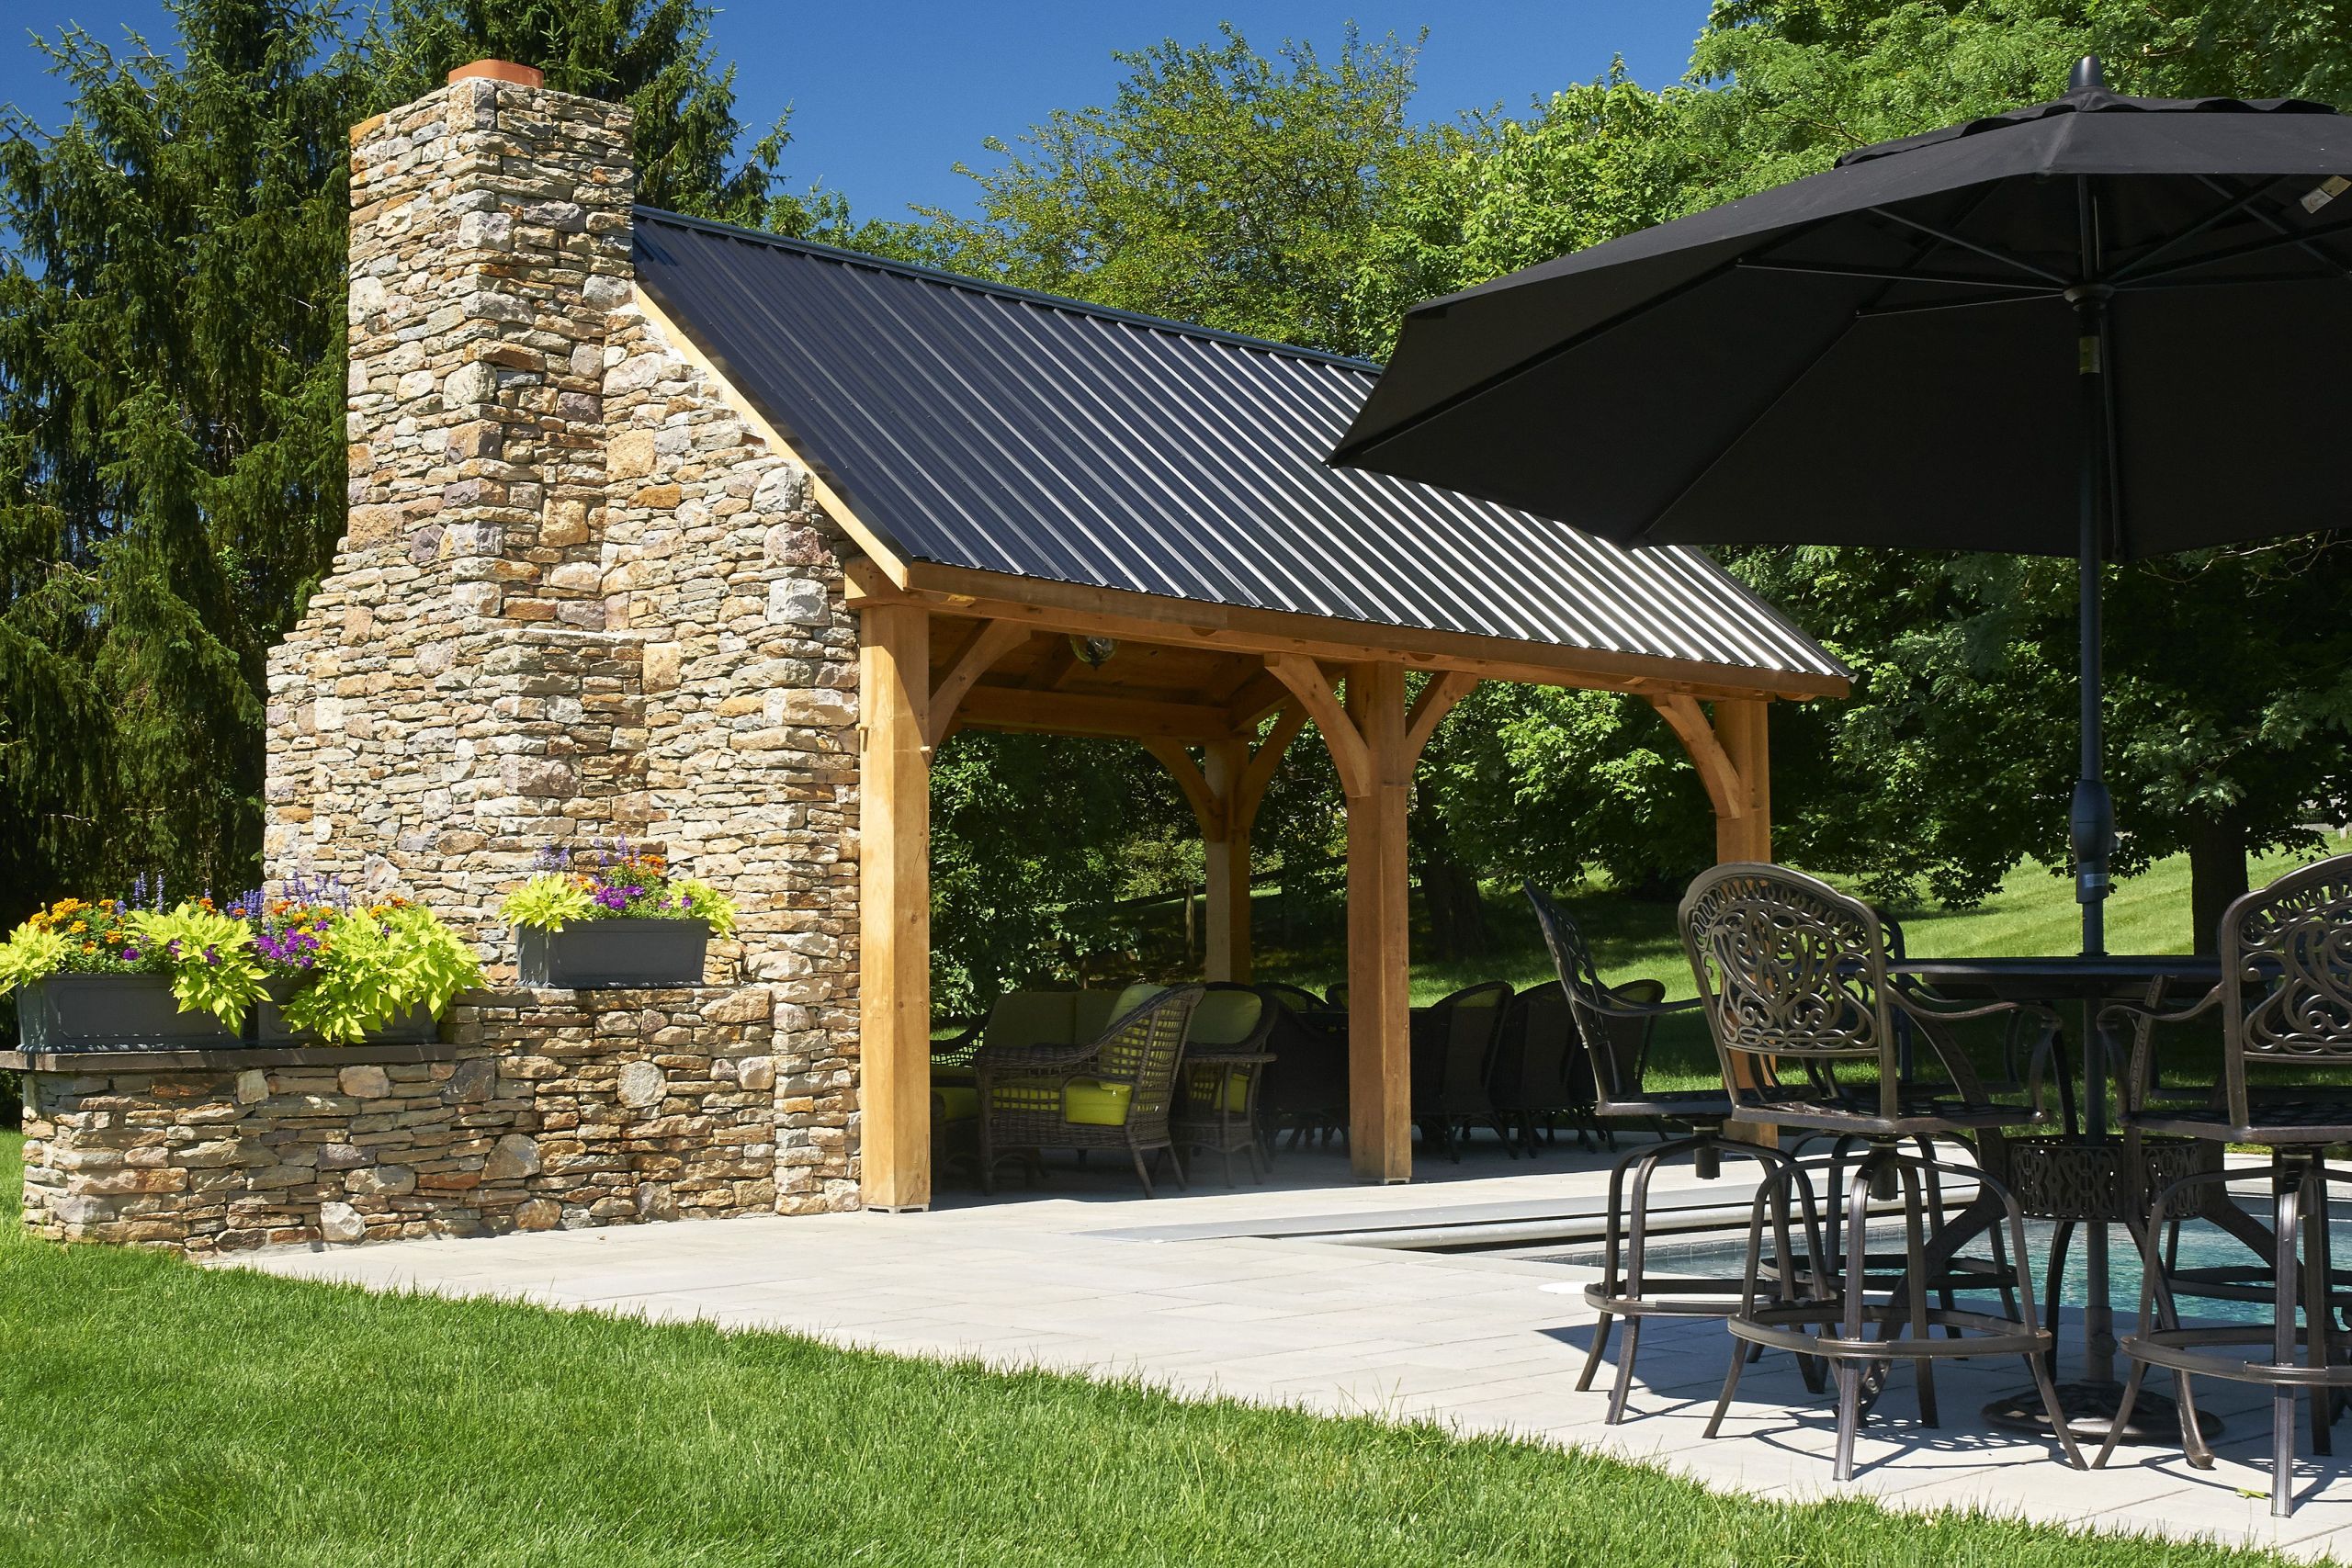 Nyc Fireplaces &amp; Outdoor Kitchens
 12 x 20 rustic timberframe pavilion with stone wall